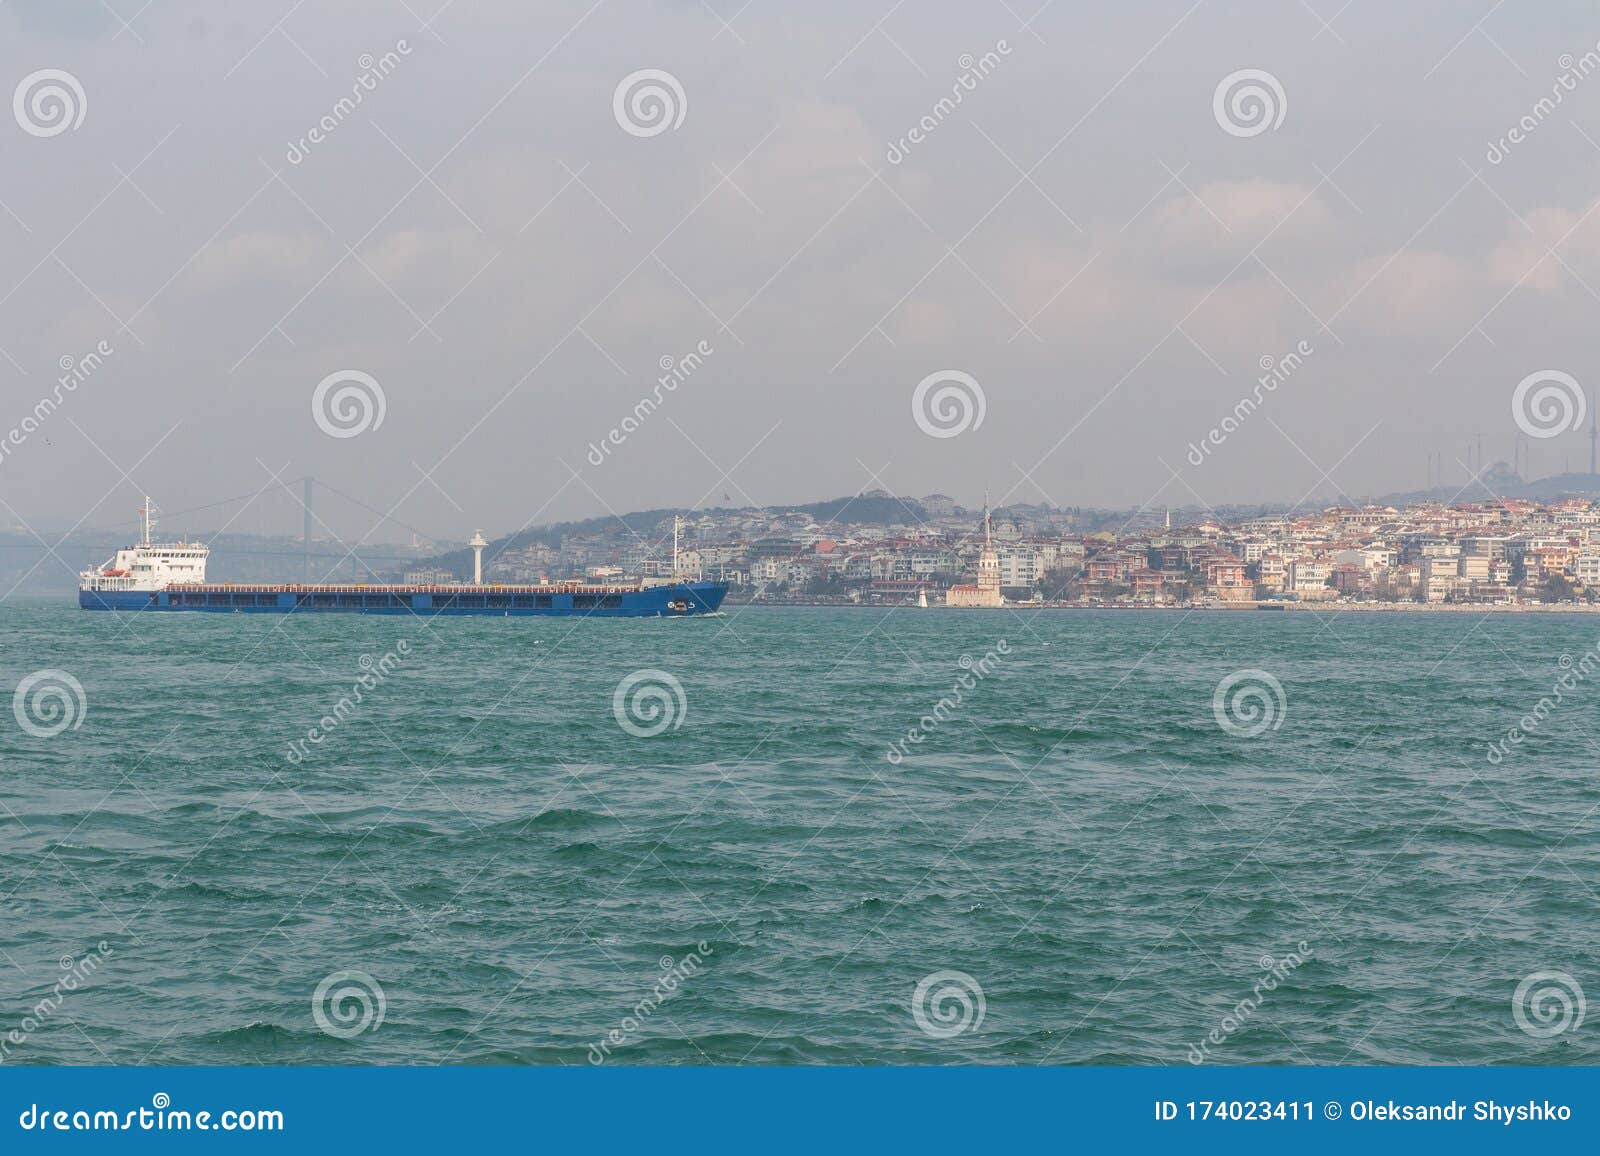 view of the bosphorus and istanbul`s ushkudai district on a sunny day. turkeyturkey